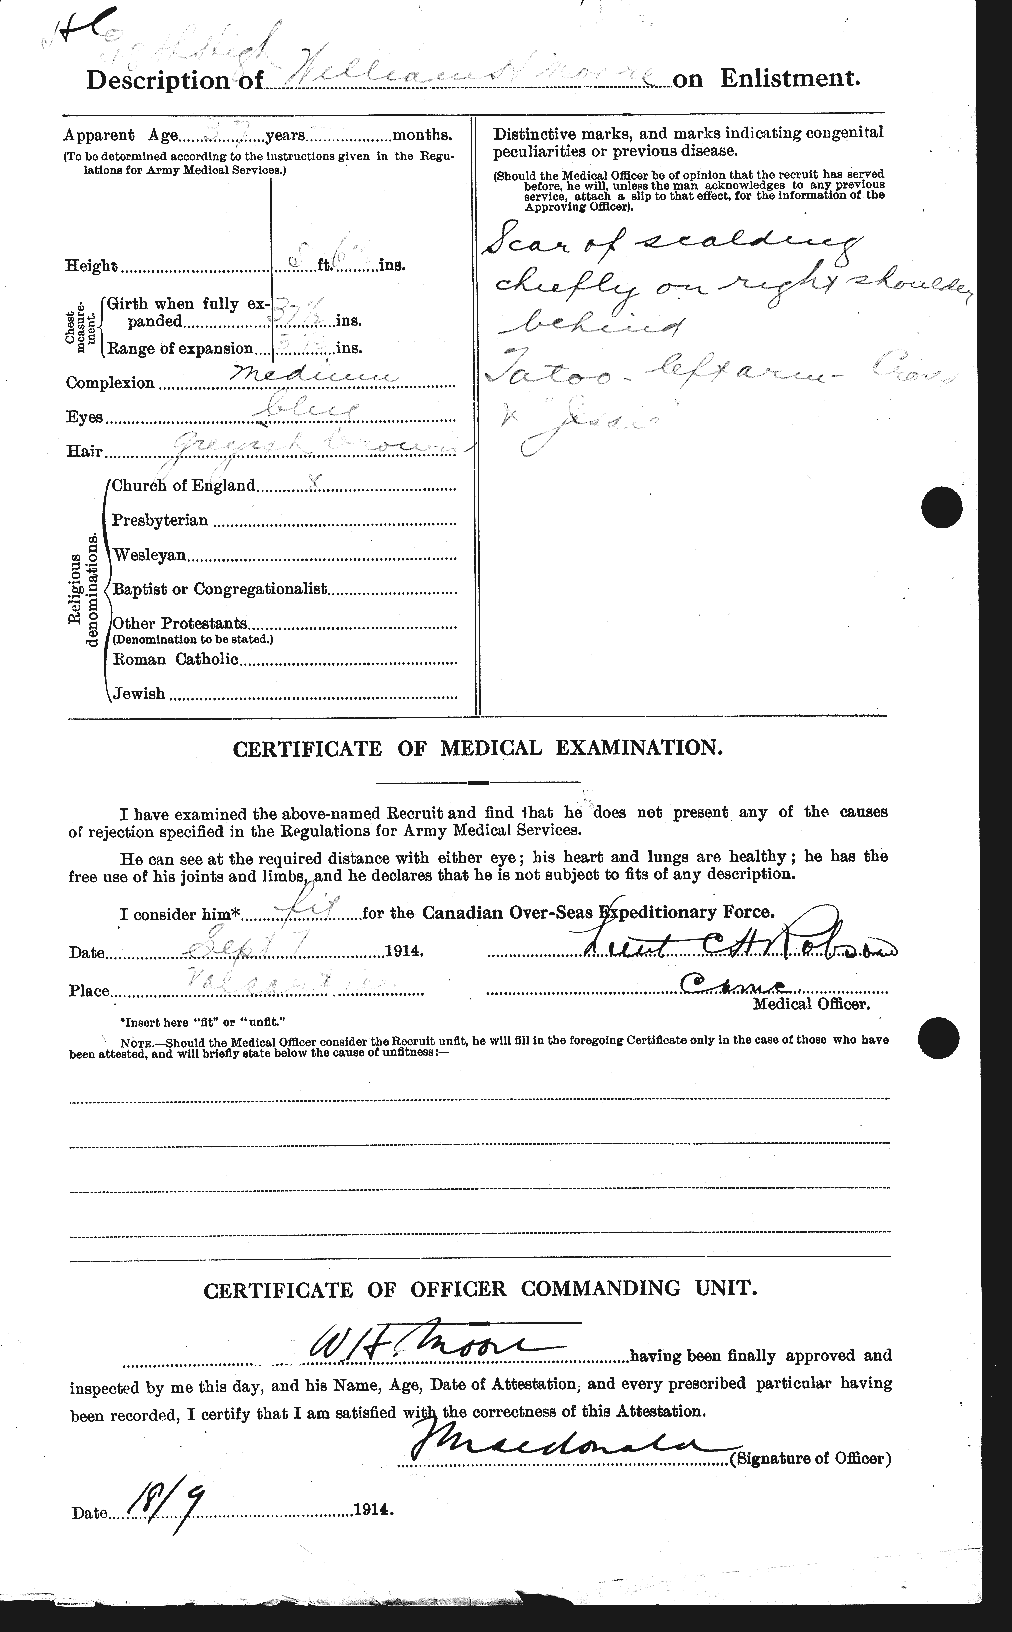 Personnel Records of the First World War - CEF 505817b